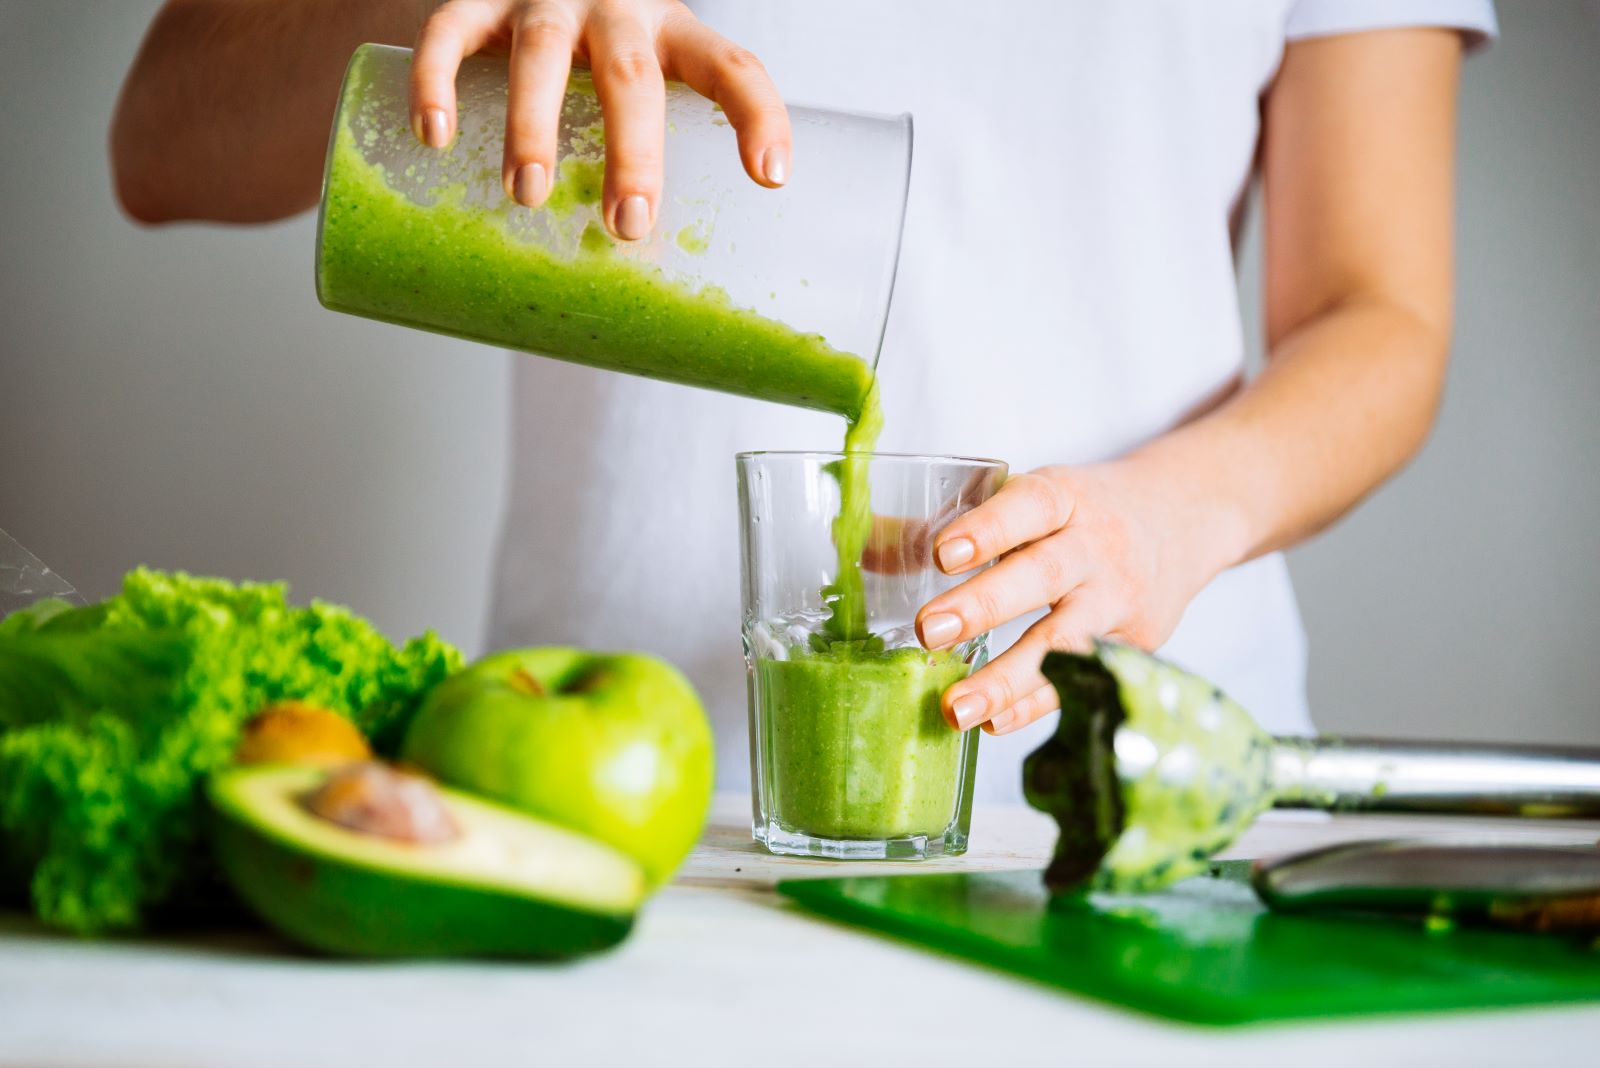 4 Reasons to Rethink Your New Year's Cleanse or Detox